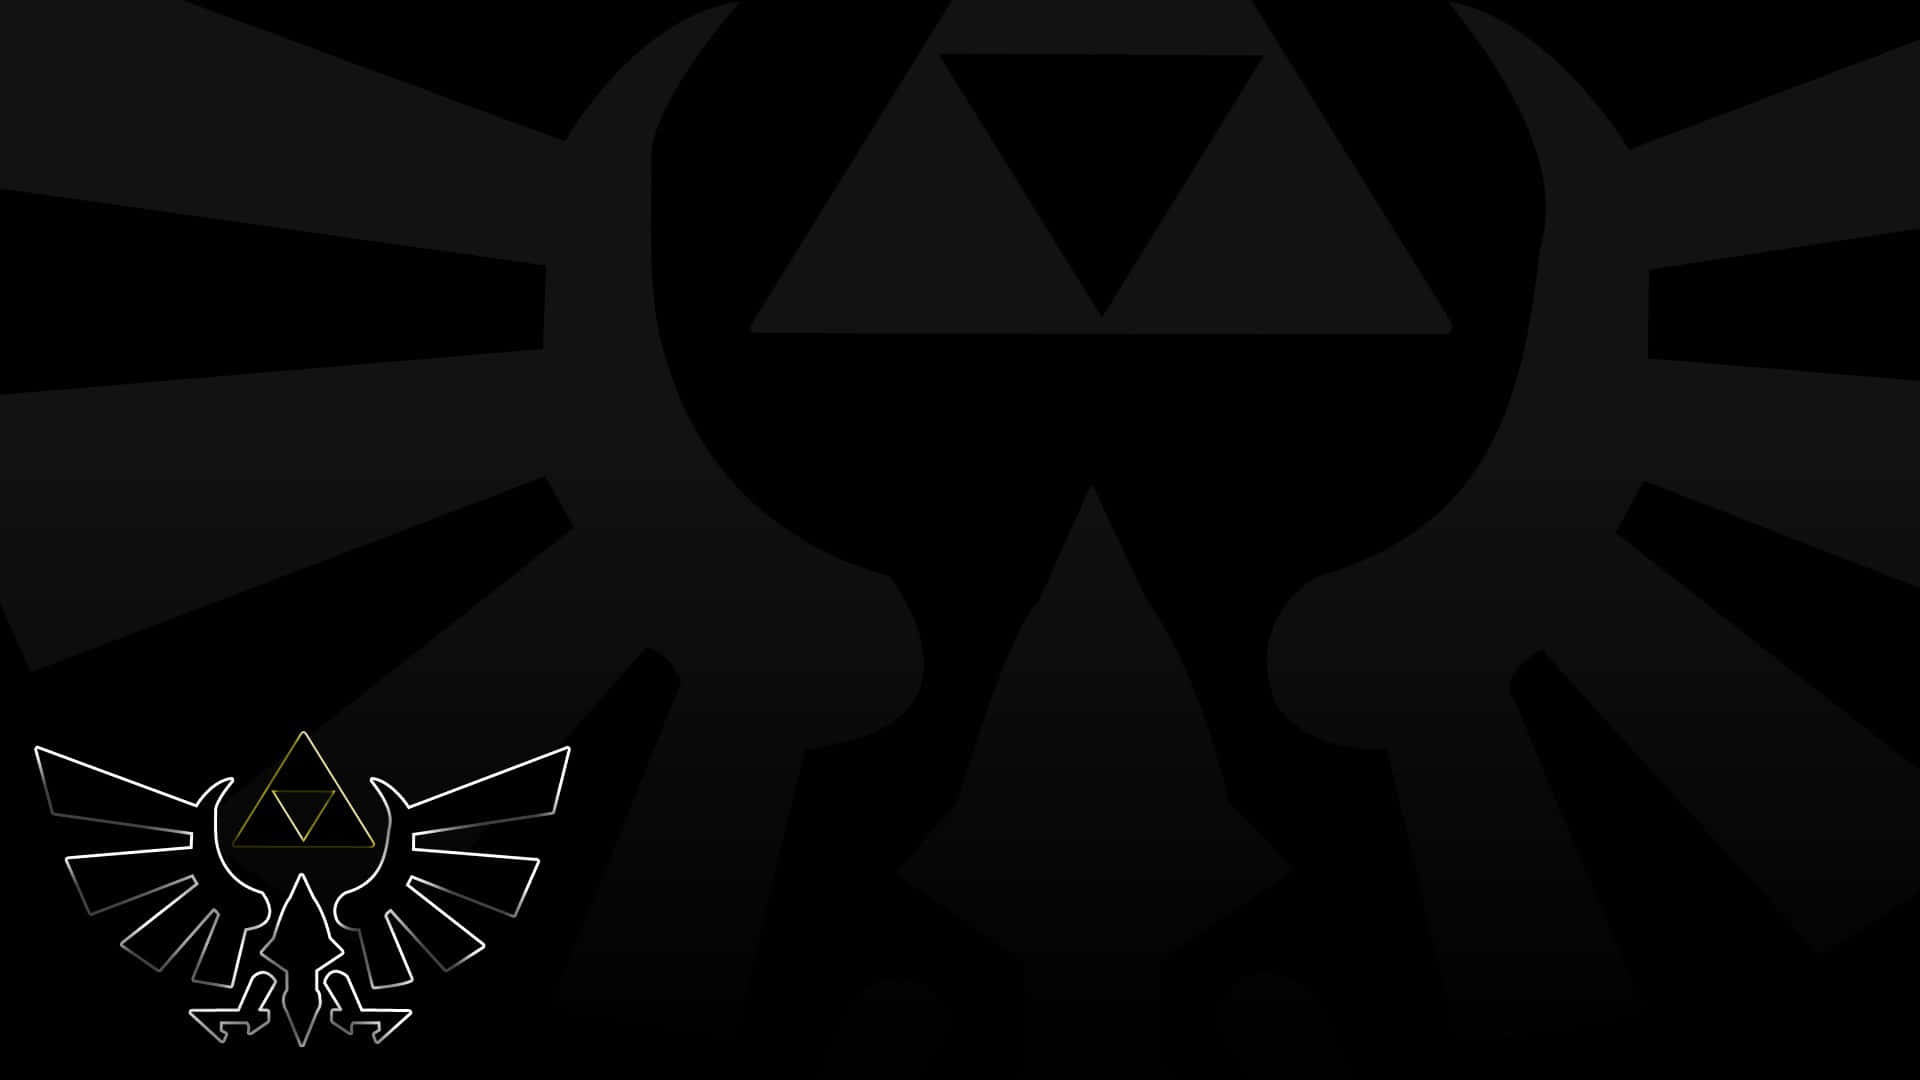 Image A Beautiful Representation Of The Legend Of Zelda's Triforce